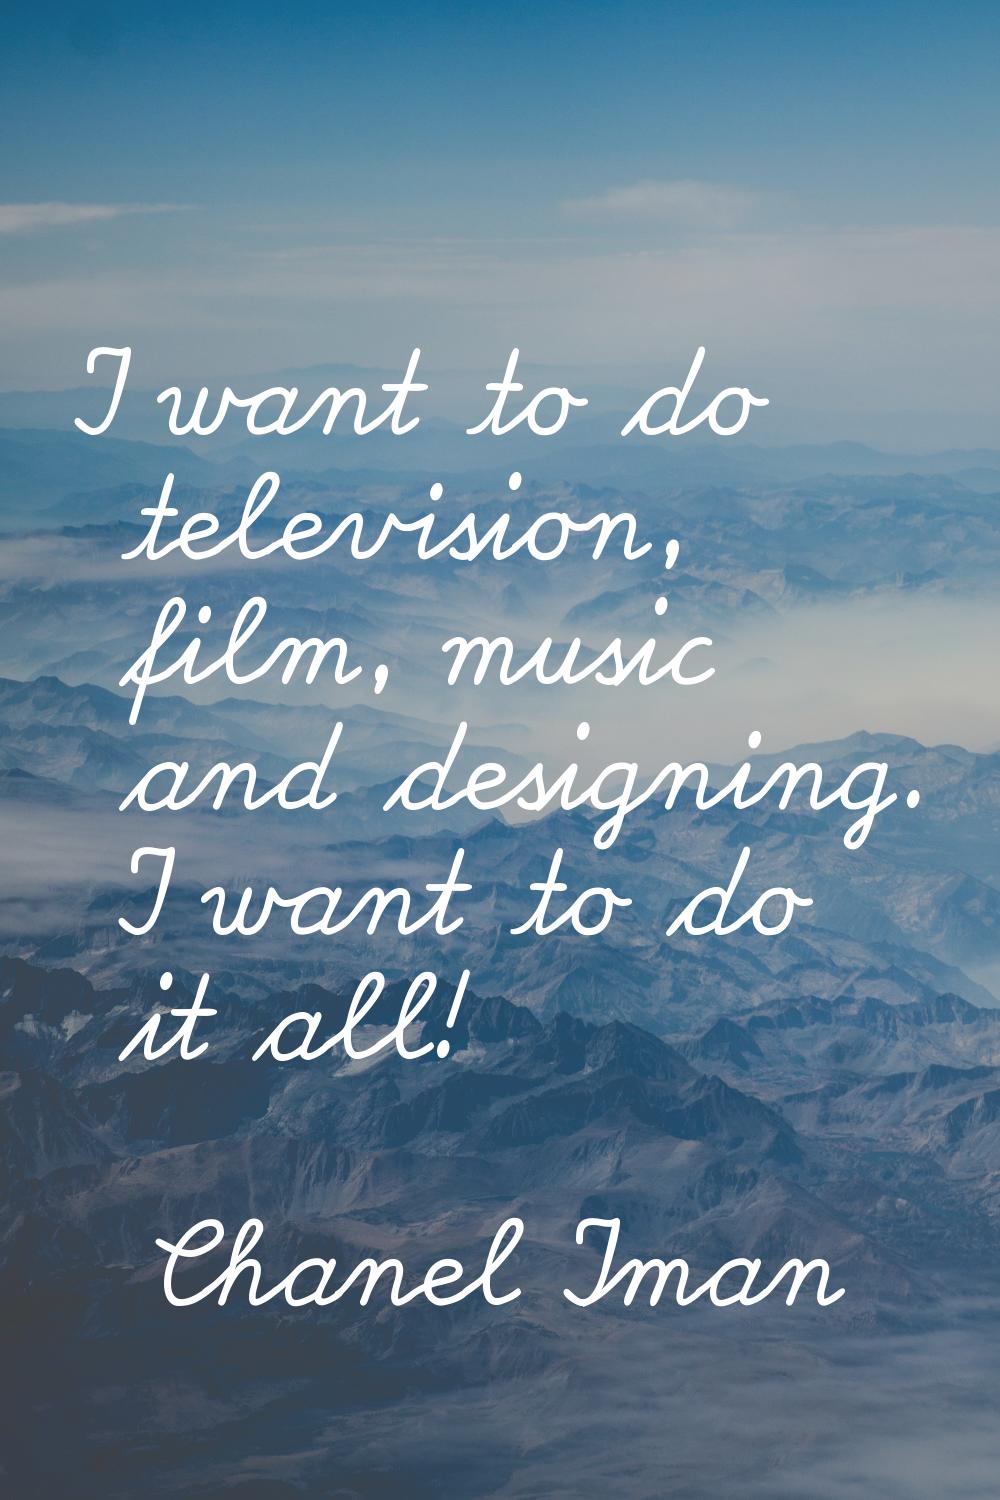 I want to do television, film, music and designing. I want to do it all!